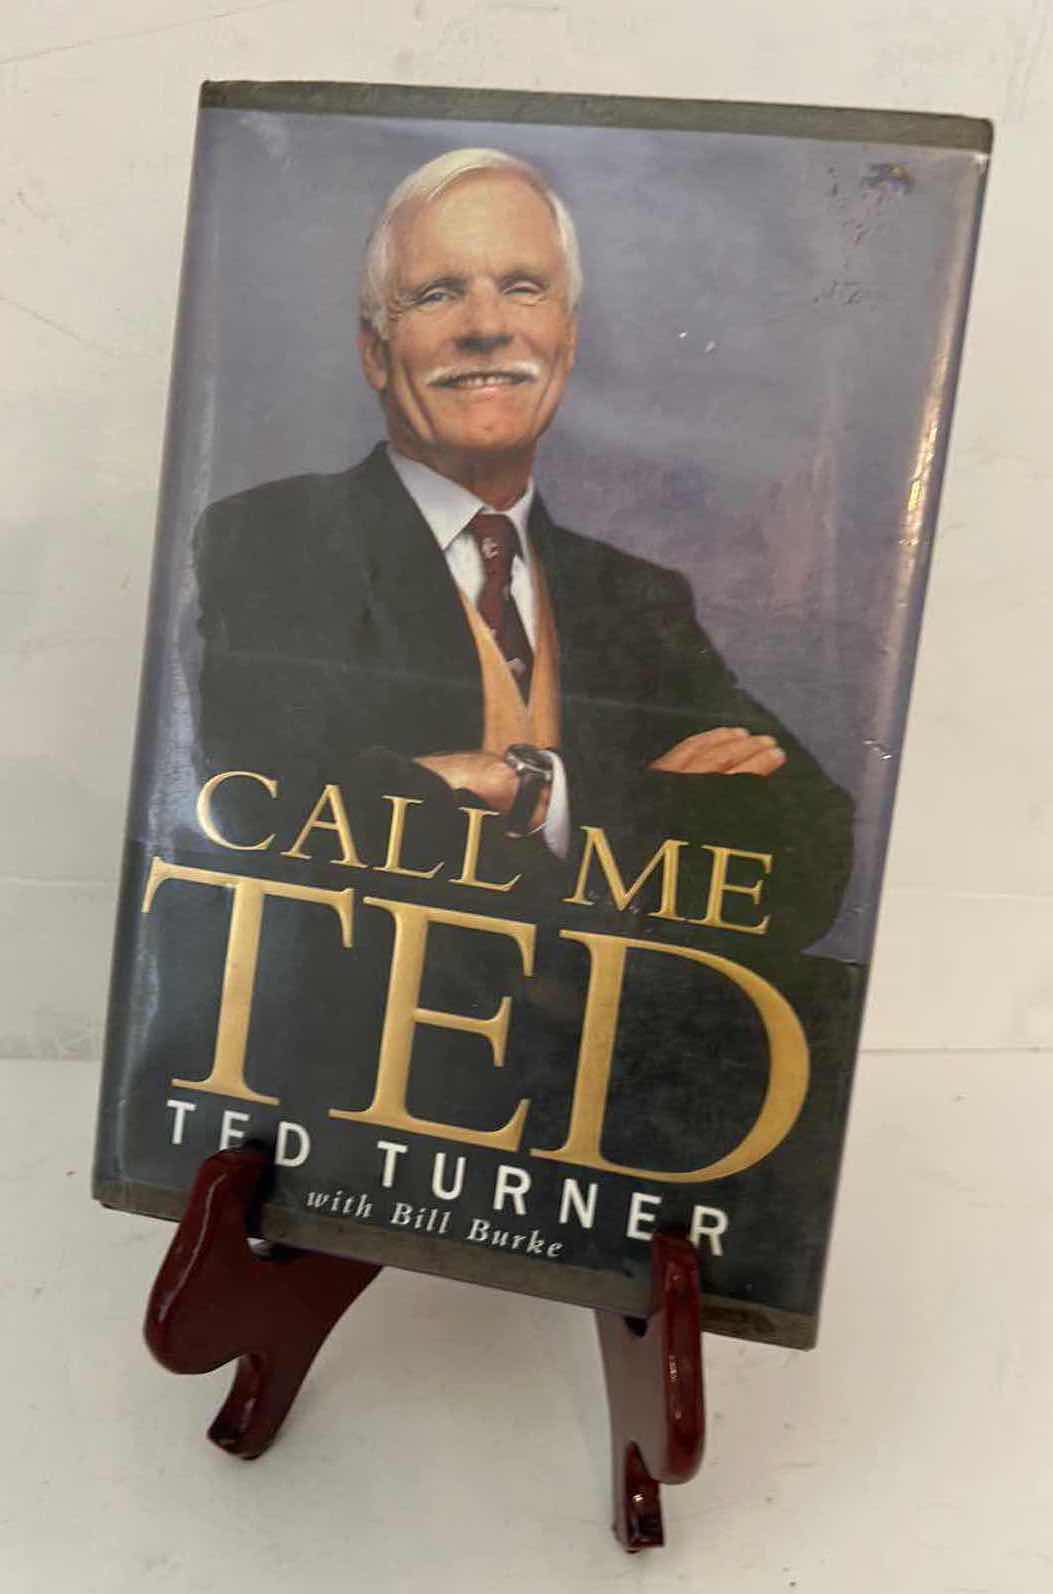 Photo 1 of AUTOGRAPHED HARDCOVER “CALL ME TED, TED TURNER” BY BILL BURKE